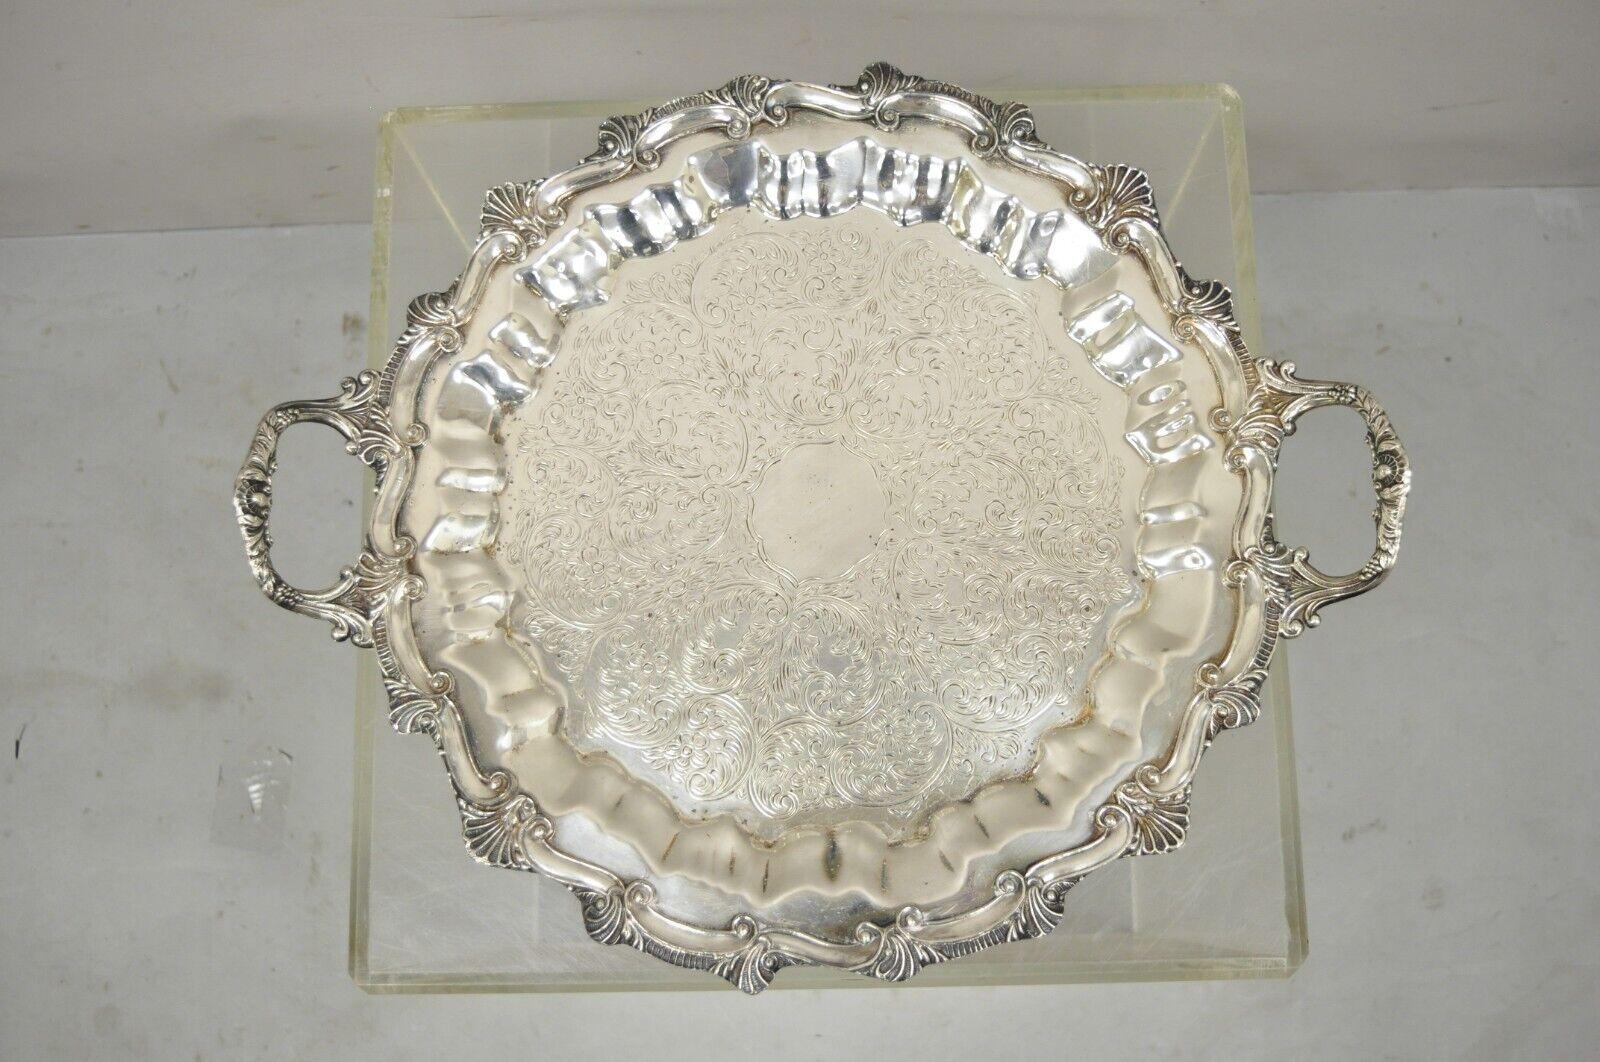 Regency Style Ornate Heavy Silver Plated Twin Handle Scalloped Platter Tray For Sale 4